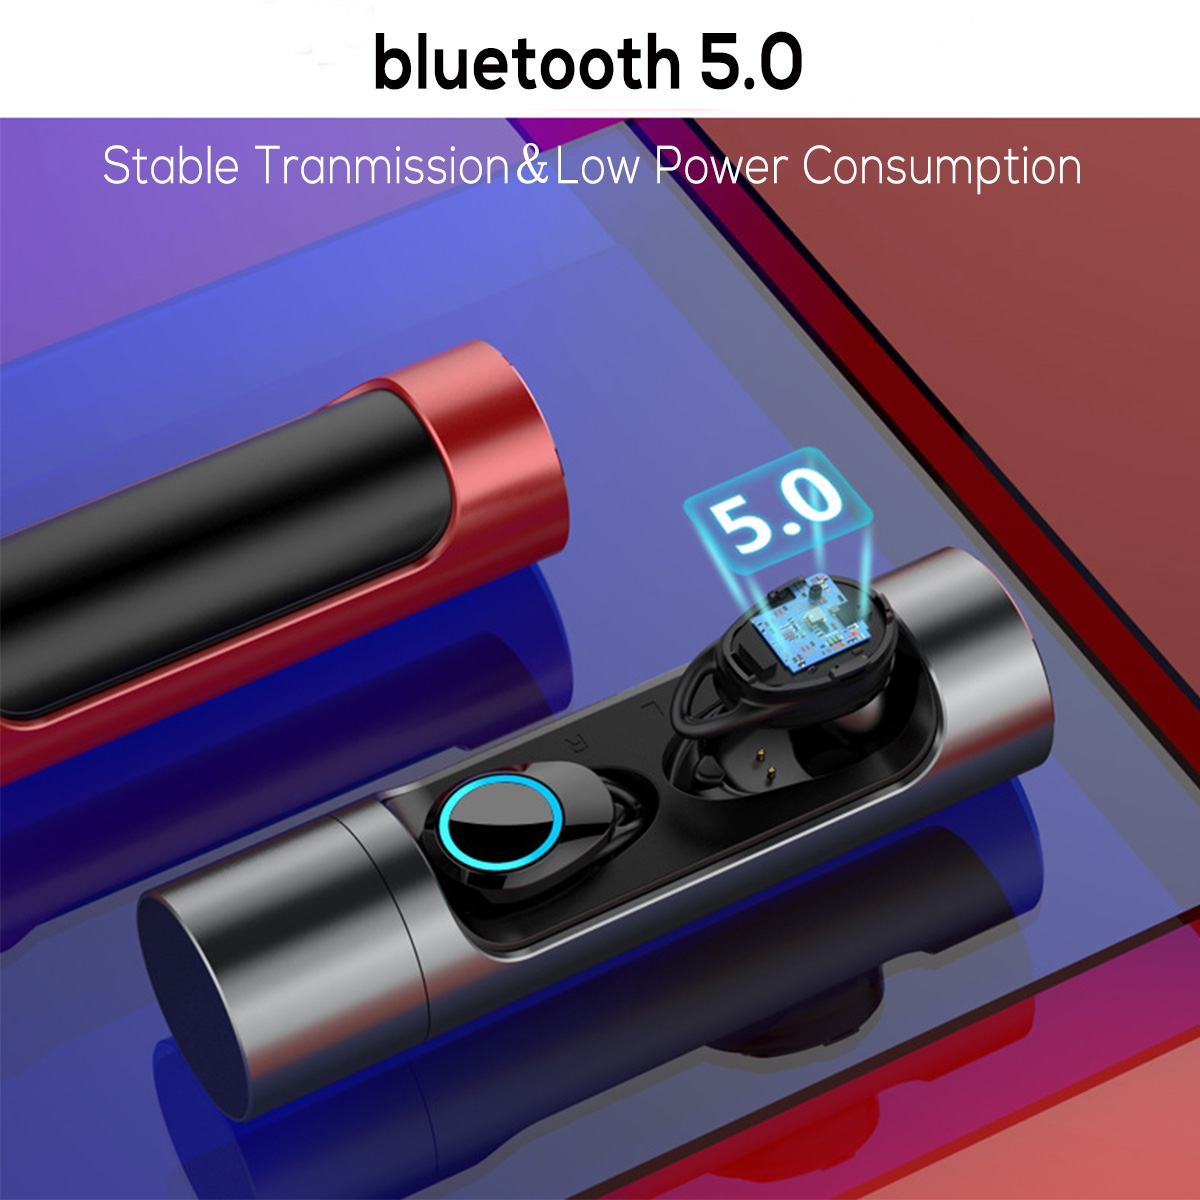 bluetooth-50-Mini-TWS-Earbuds-Smart-Touch-Bilateral-Call-IPX6-Waterproof-Earphone-with-1000mAh-Charg-1439770-4